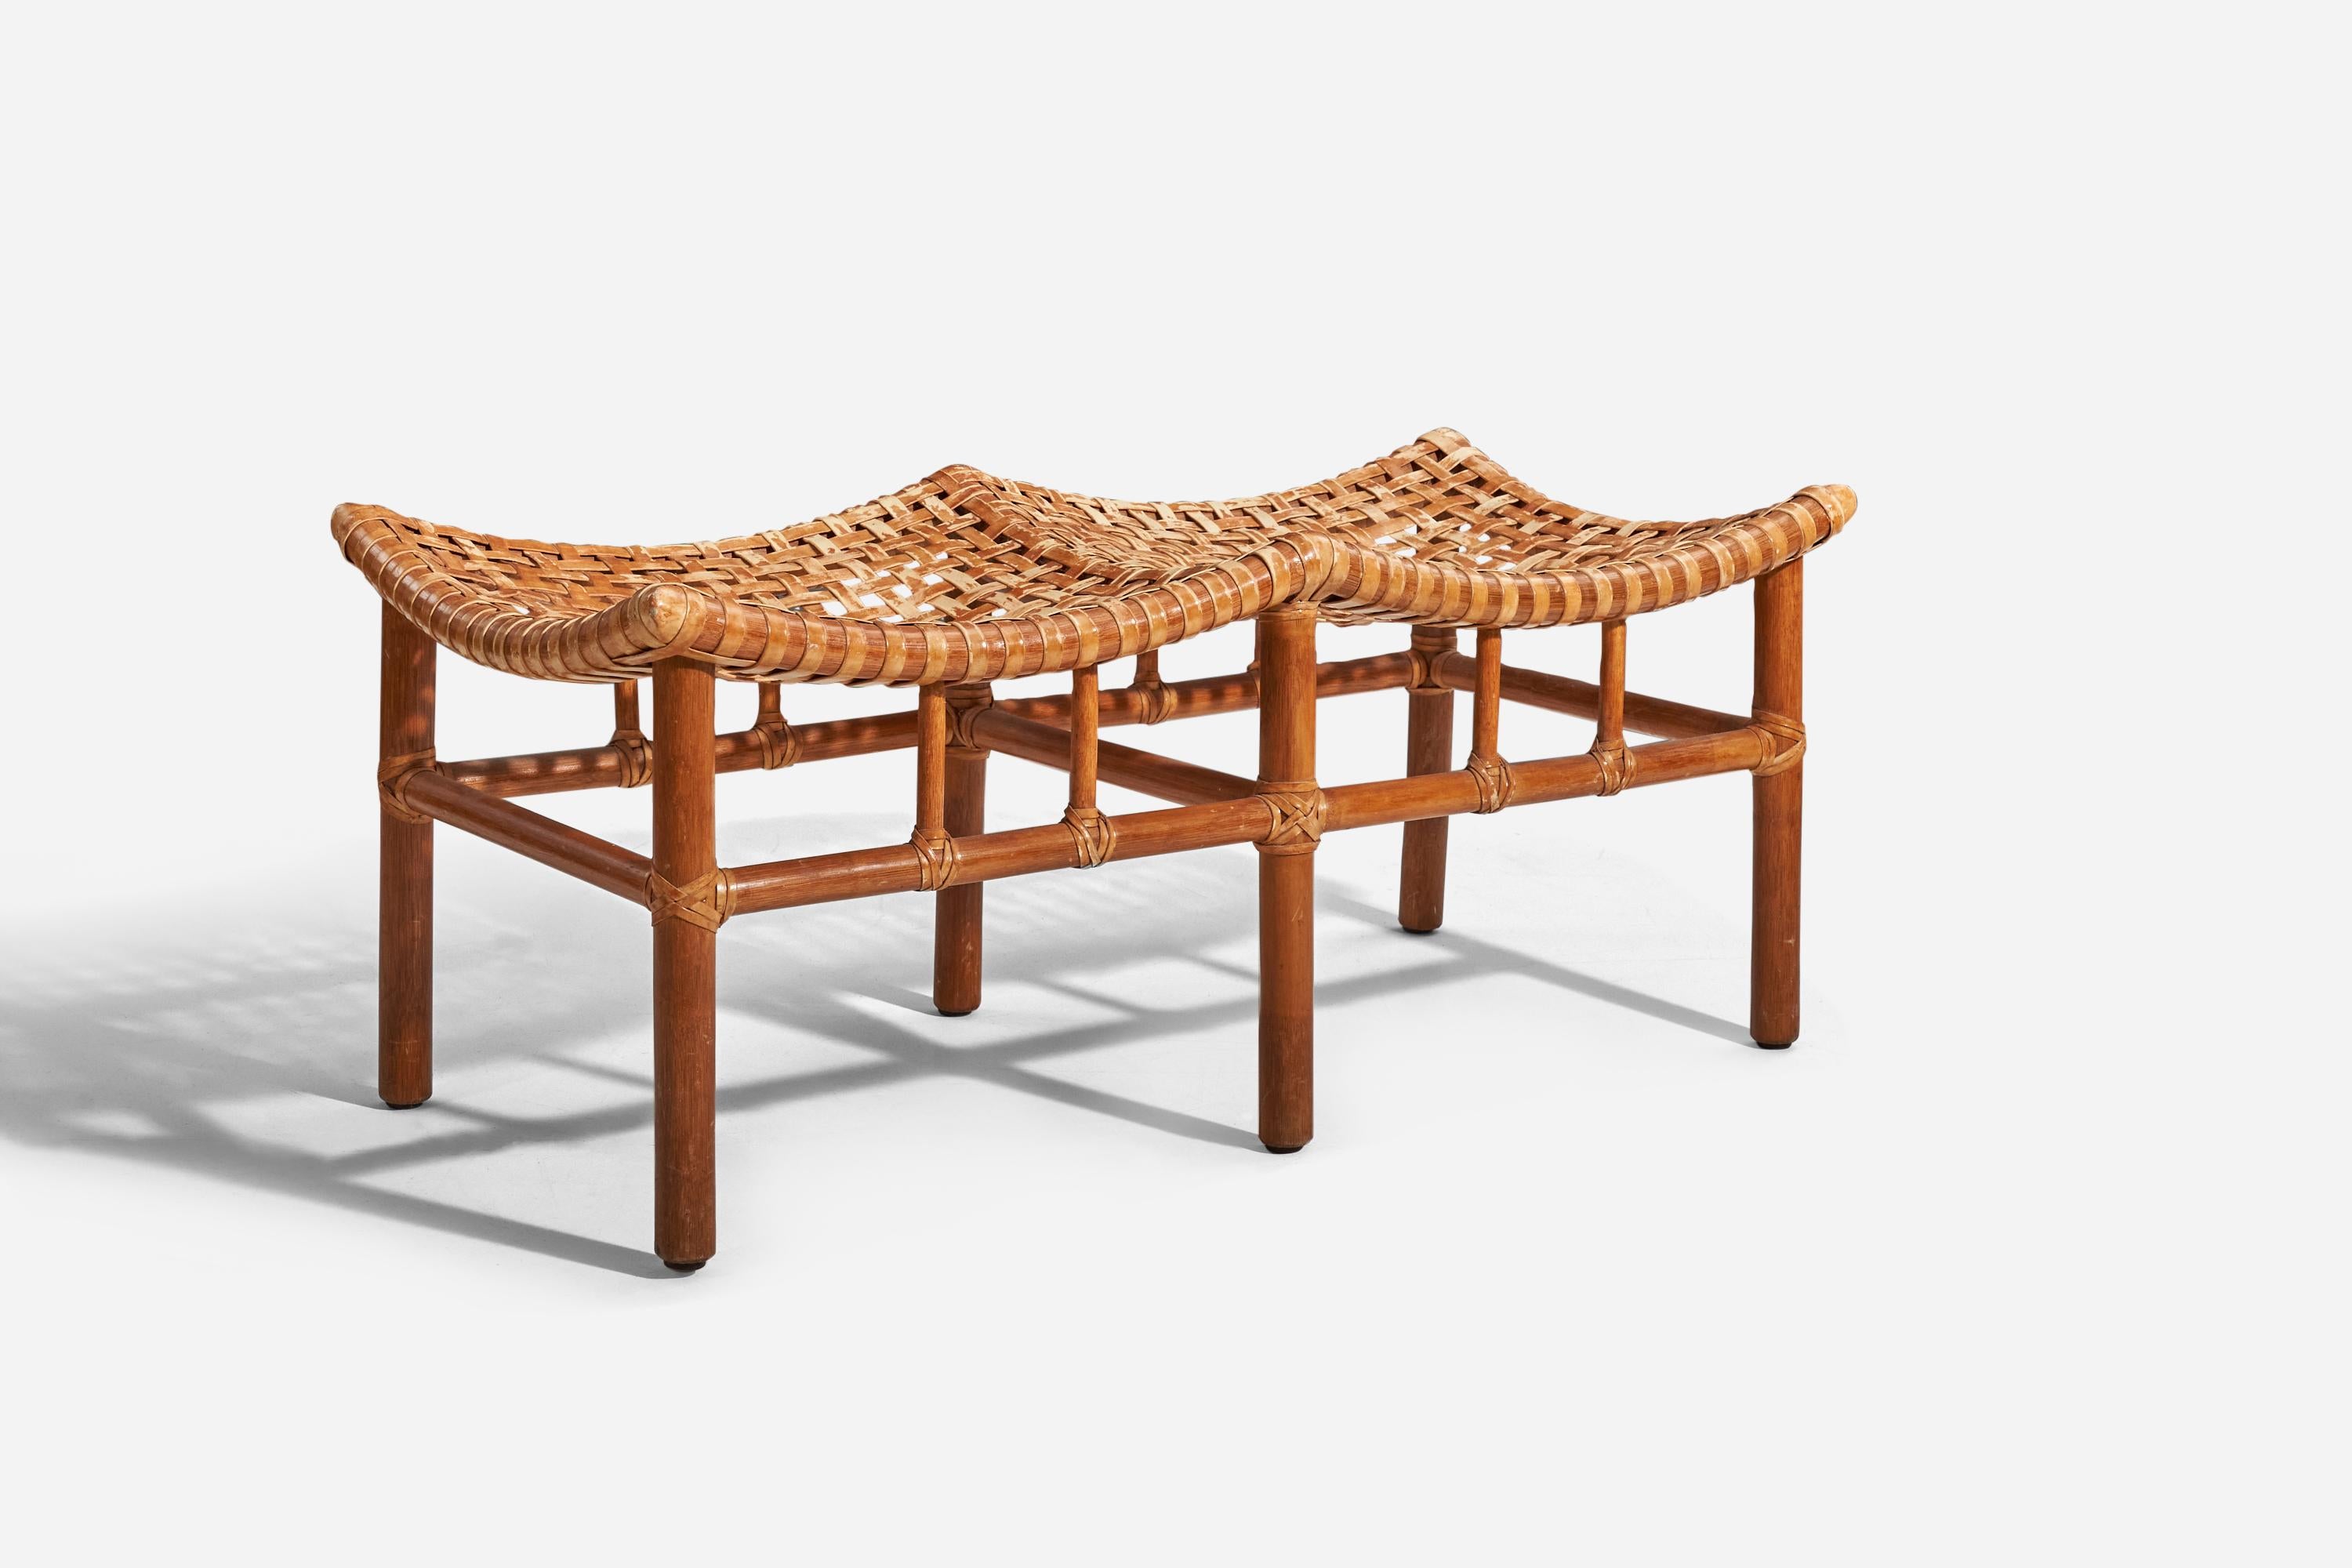 A bamboo, leather and rattan bench designed and produced by McGuire Furniture, United States, 1970s.